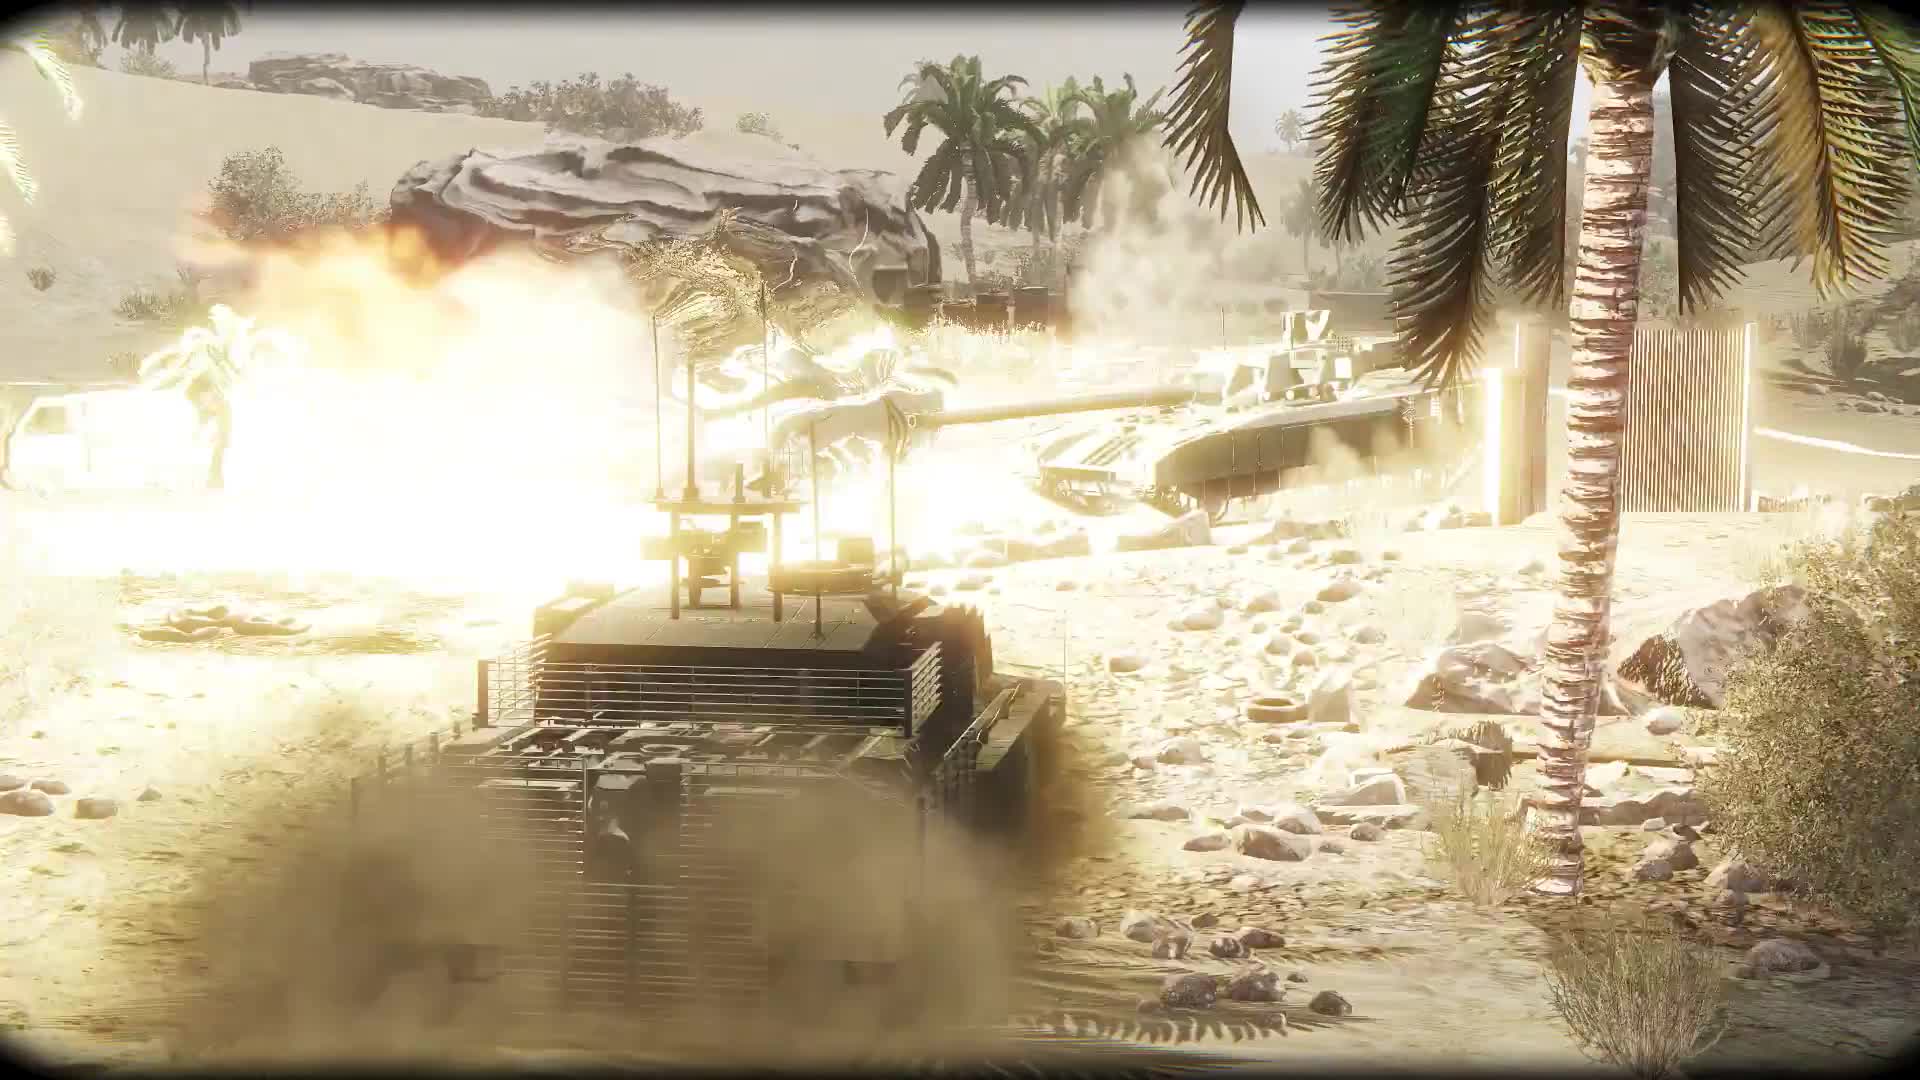 Armored Warfare - Global Operations Preview Trailer